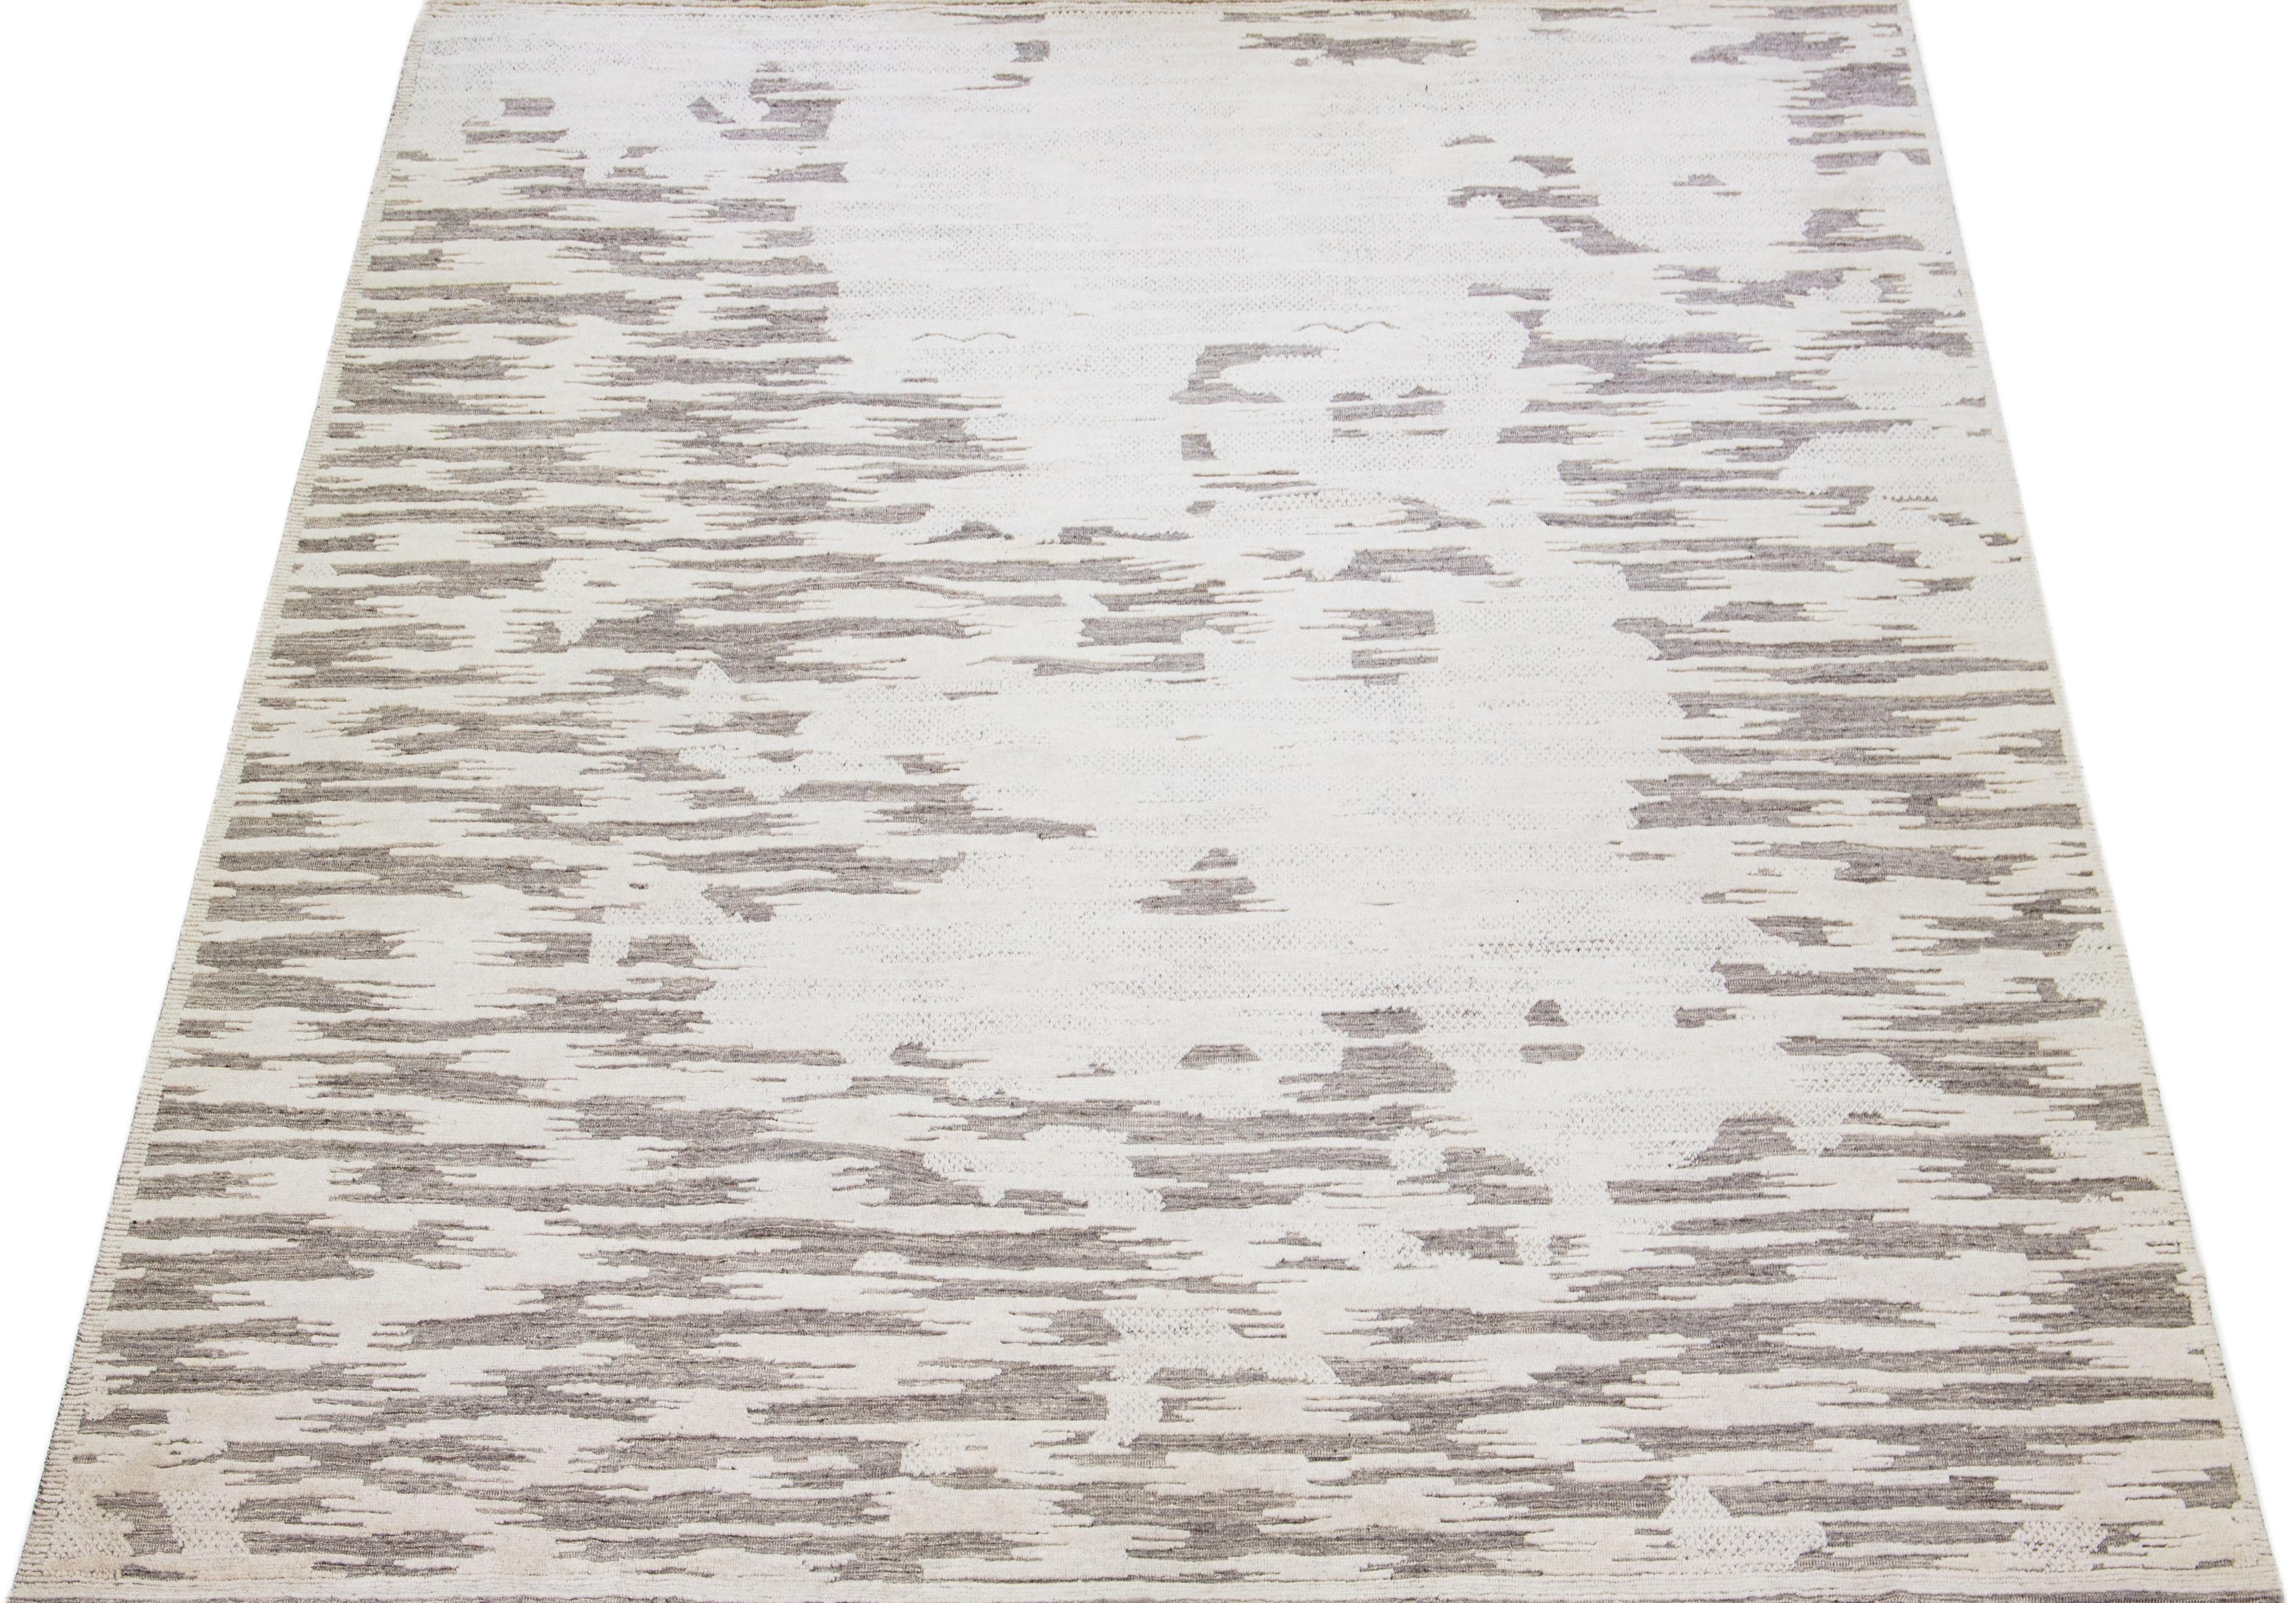 Beautiful modern Moroccan-style hand-knotted wool rug with a beige and ivory color field. This rug is part of our Apadana's Safi Collection and features a minimalist design in gray.

This rug measures: 12'2